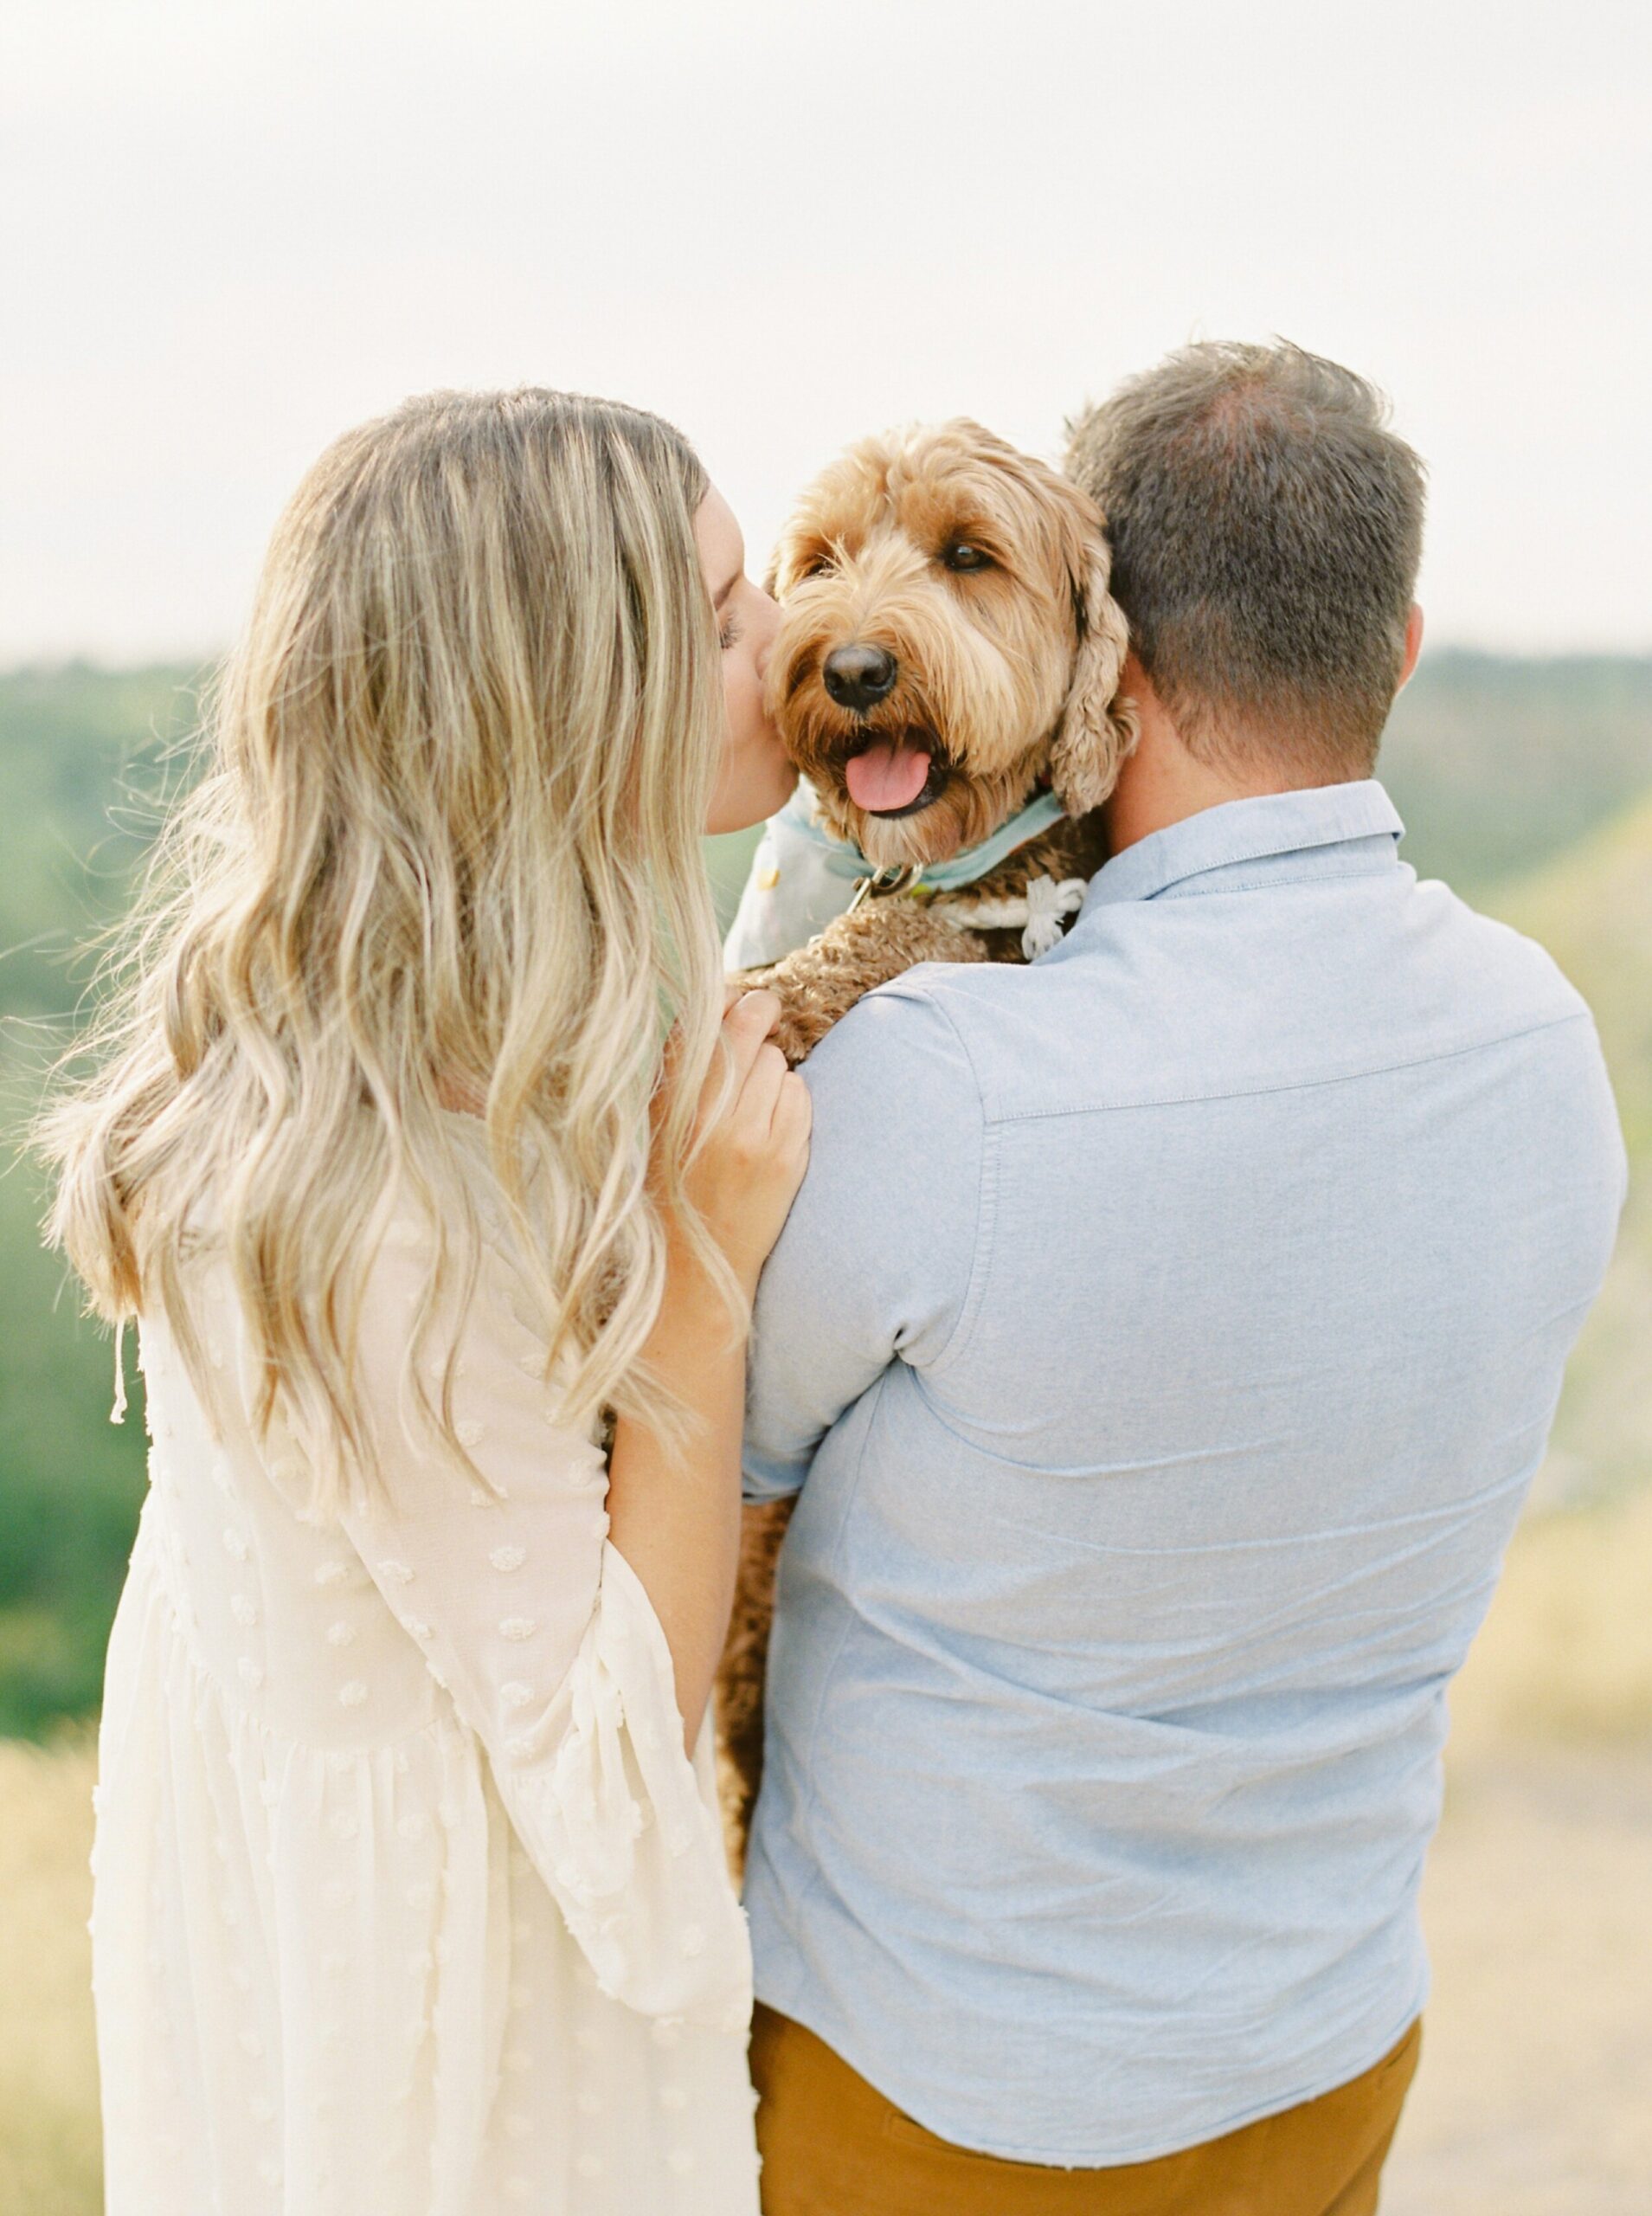  Couples session date night ice cream and a dog walk at the beach | adventure session | golden doodle photo shoot | Justine Milton fine art film photographer portra 400 